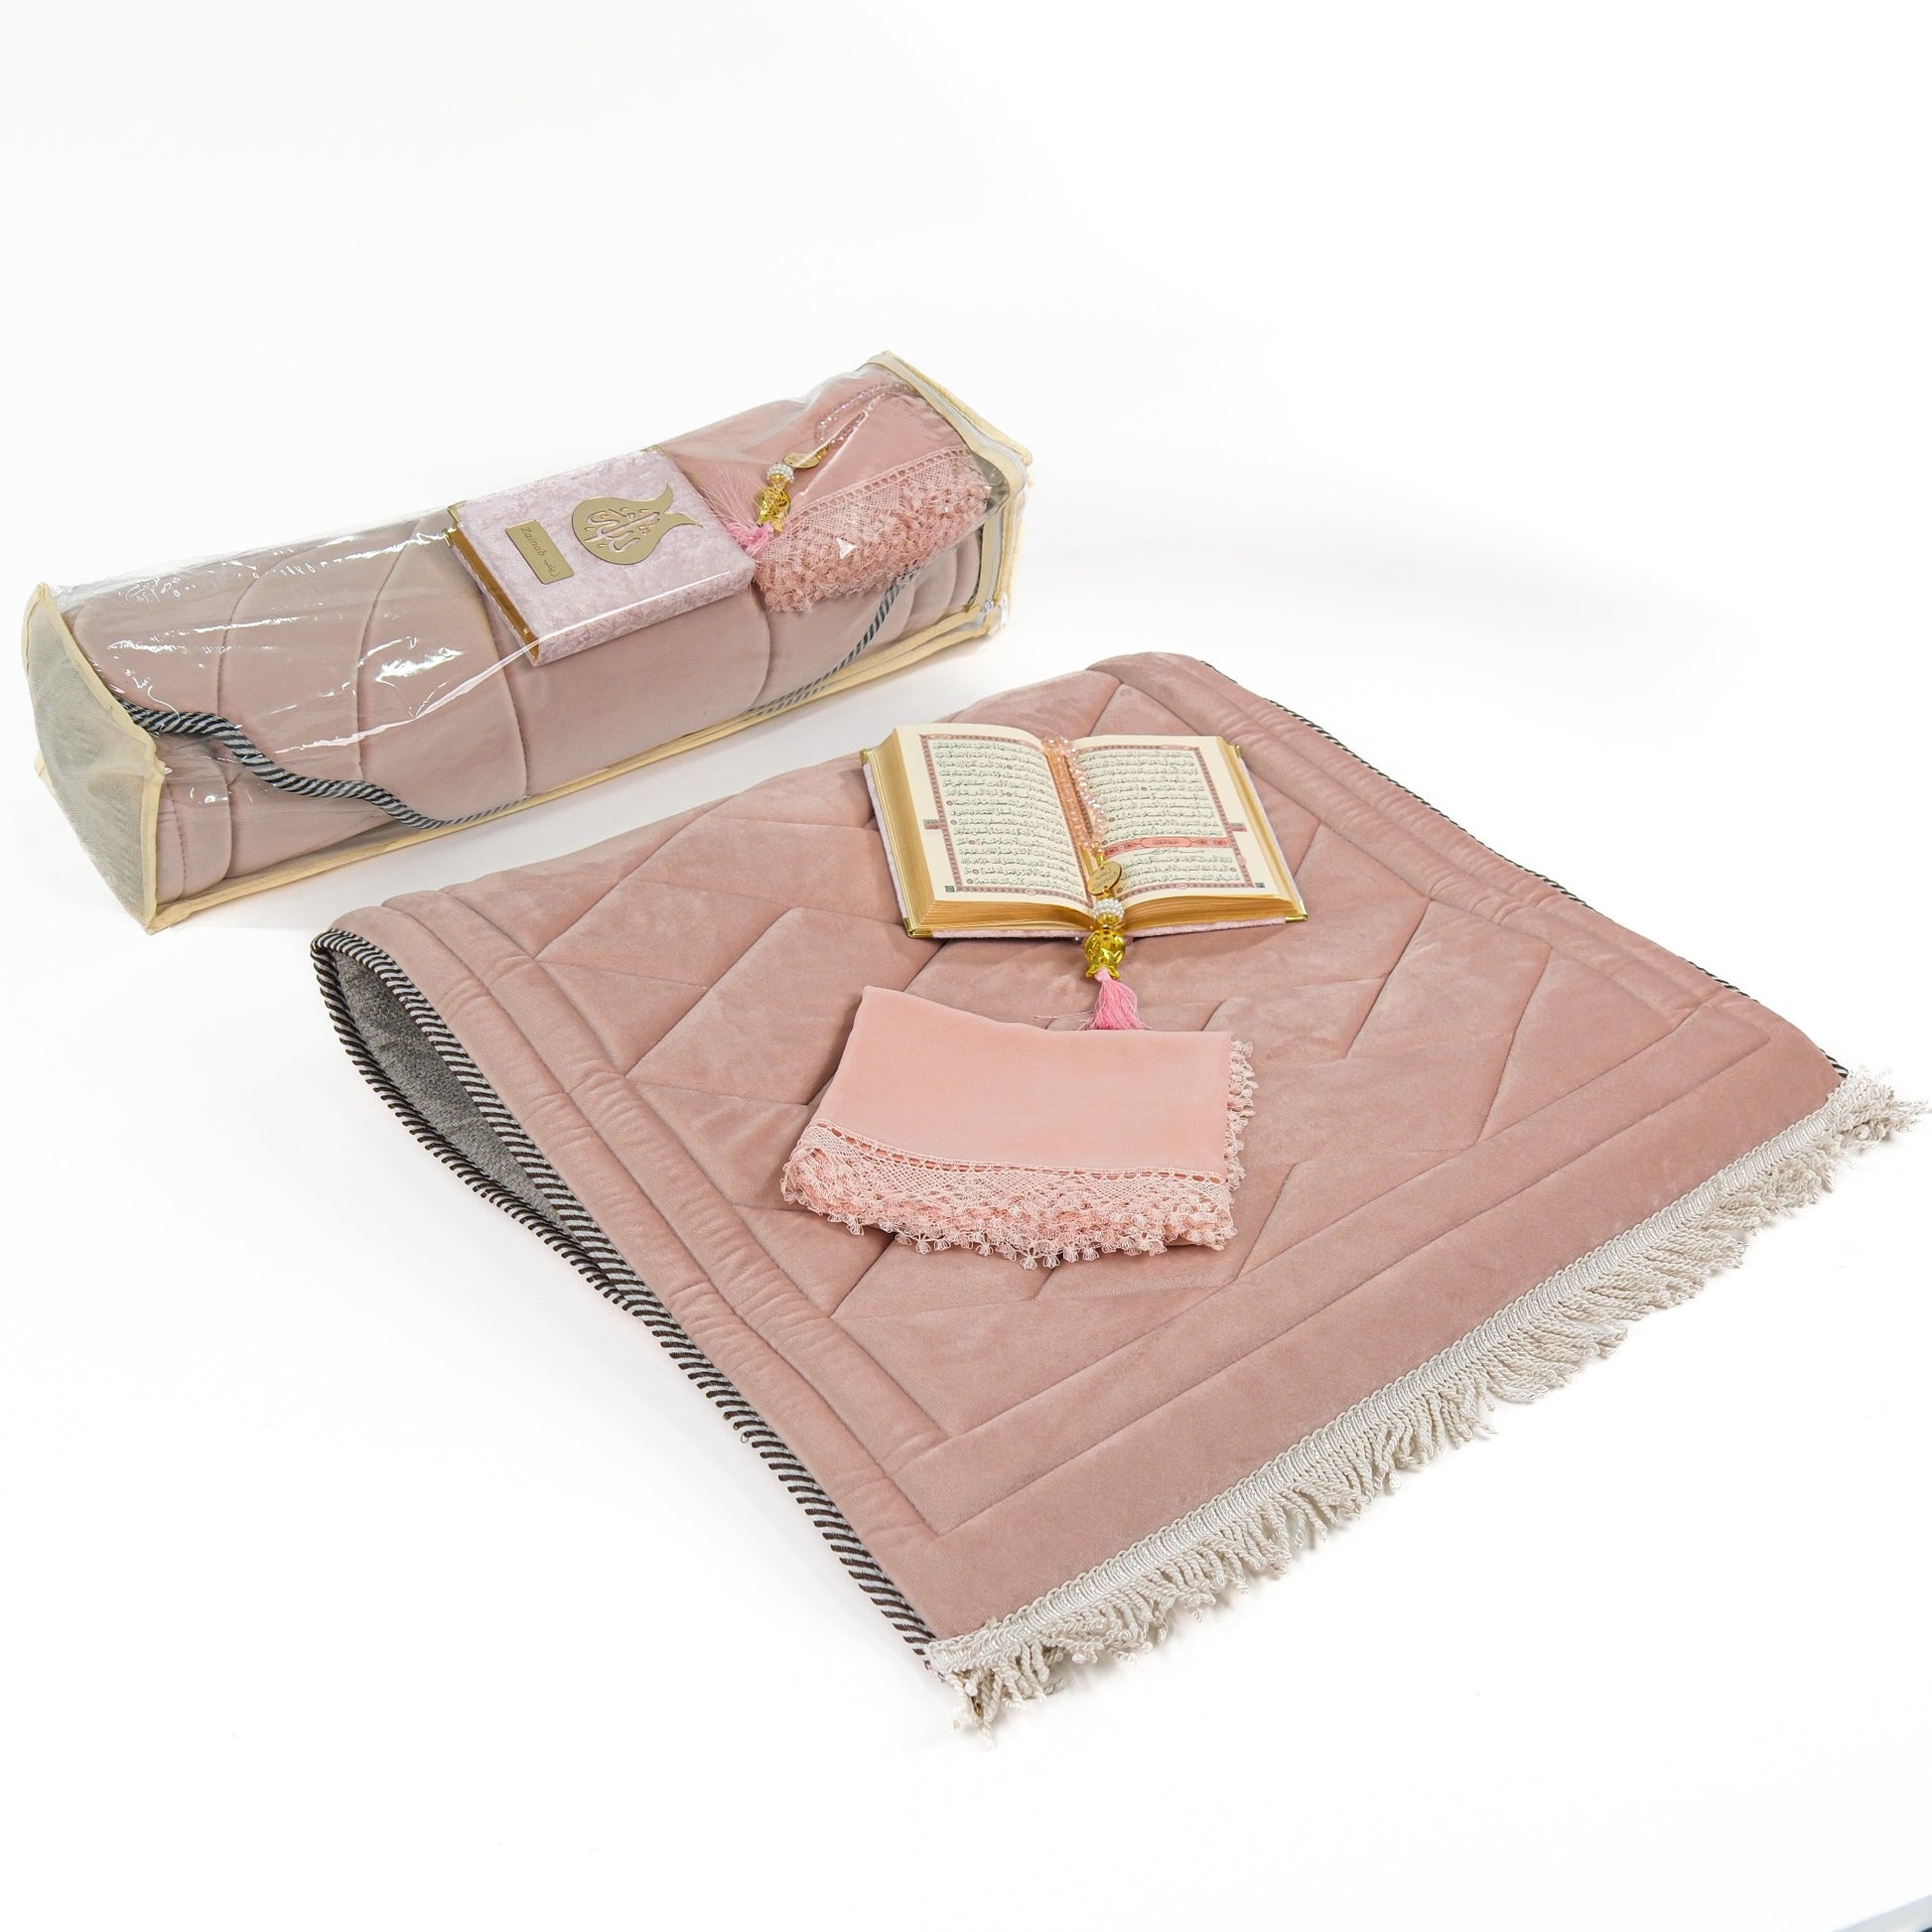 Padded Thick Prayer Mat Quran Tasbeeh Shawl Islamic Muslim Gift Set - Islamic Elite Favors is a handmade gift shop offering a wide variety of unique and personalized gifts for all occasions. Whether you're looking for the perfect Ramadan, Eid, Hajj, wedding gift or something special for a birthday, baby shower or anniversary, we have something for everyone. High quality, made with love.